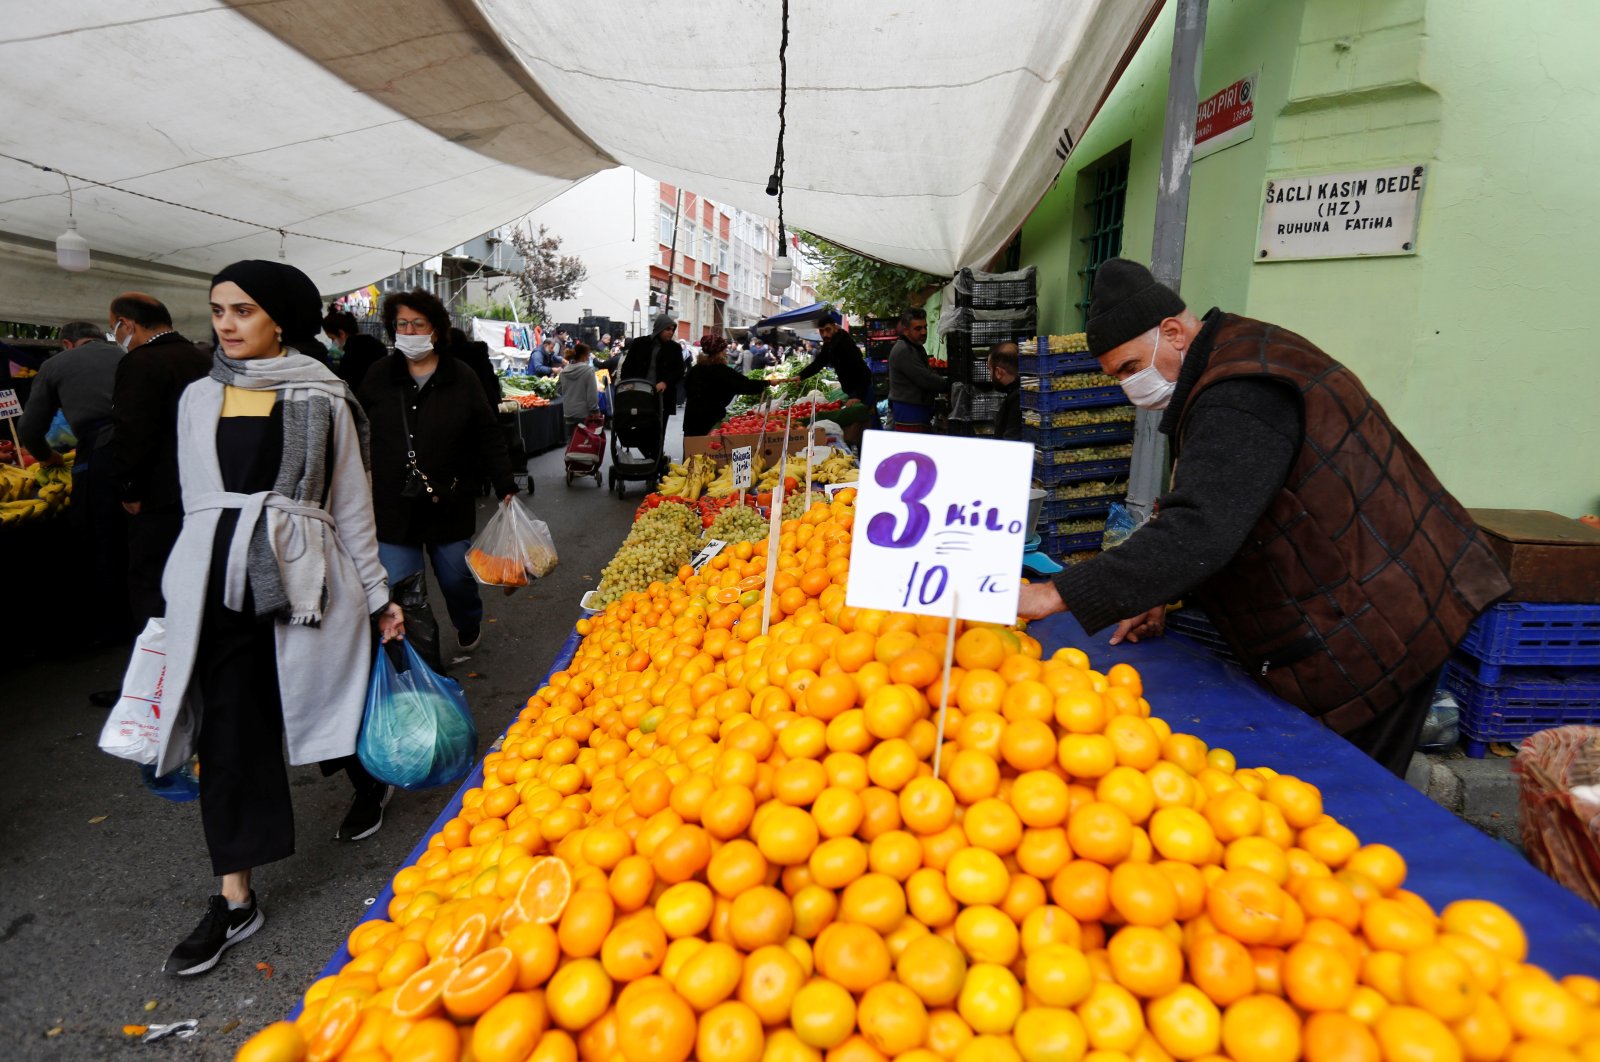 People shop at a street market in Istanbul, Turkey, Nov. 18, 2021. (Reuters Photo)